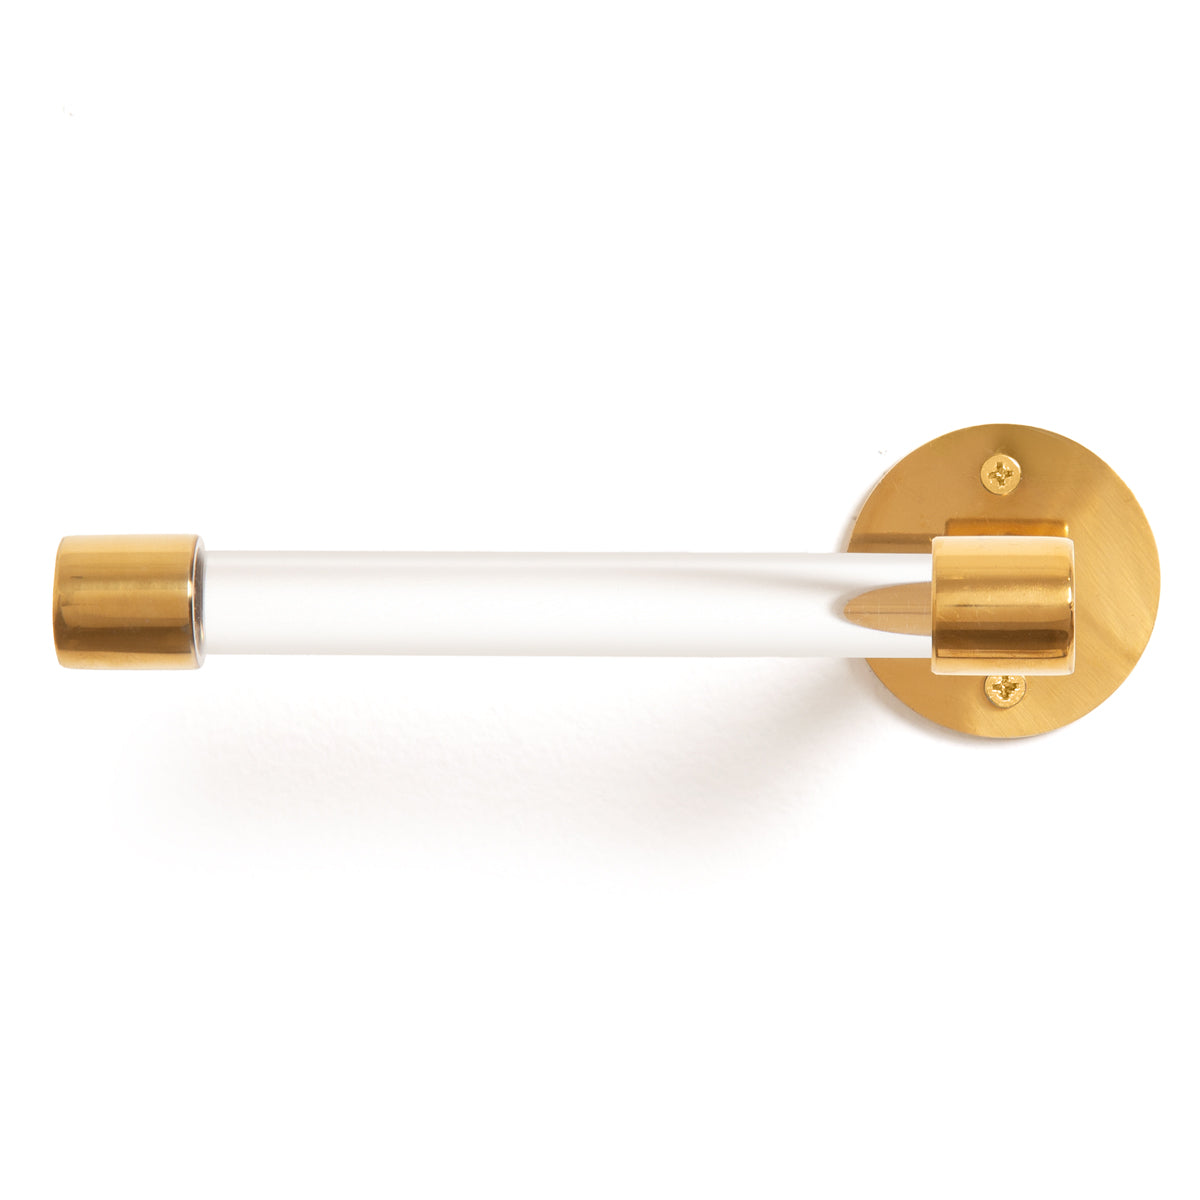 Open-style toilet paper holder with a polished brass finish and a Lucite bar in the center of the arm.